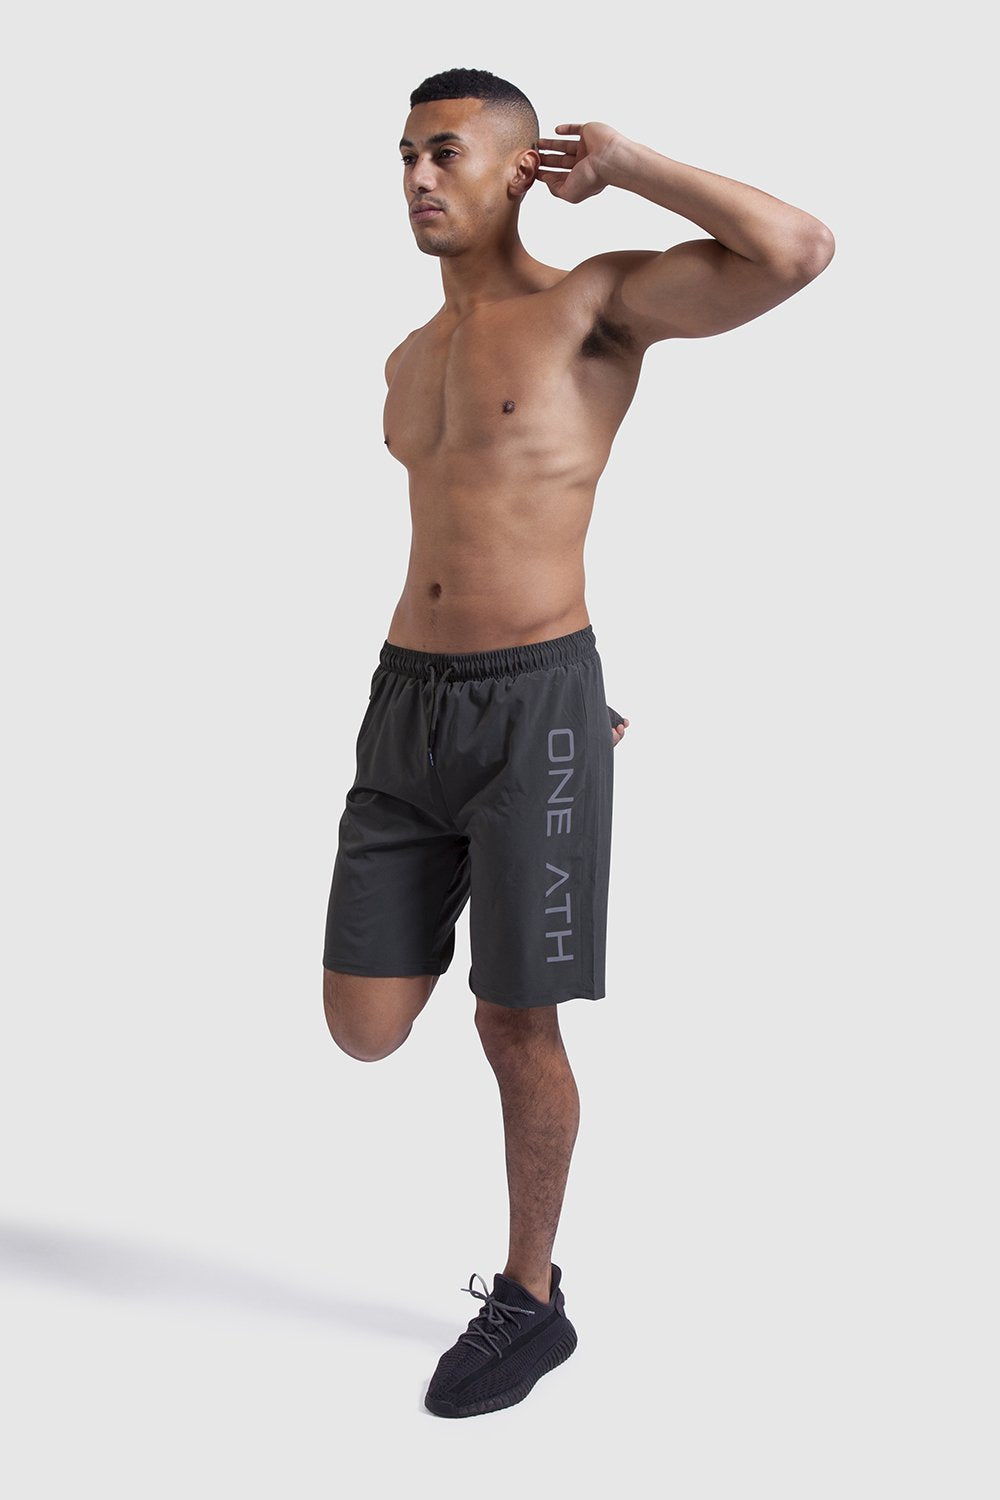 athlete stretching in mens training shorts